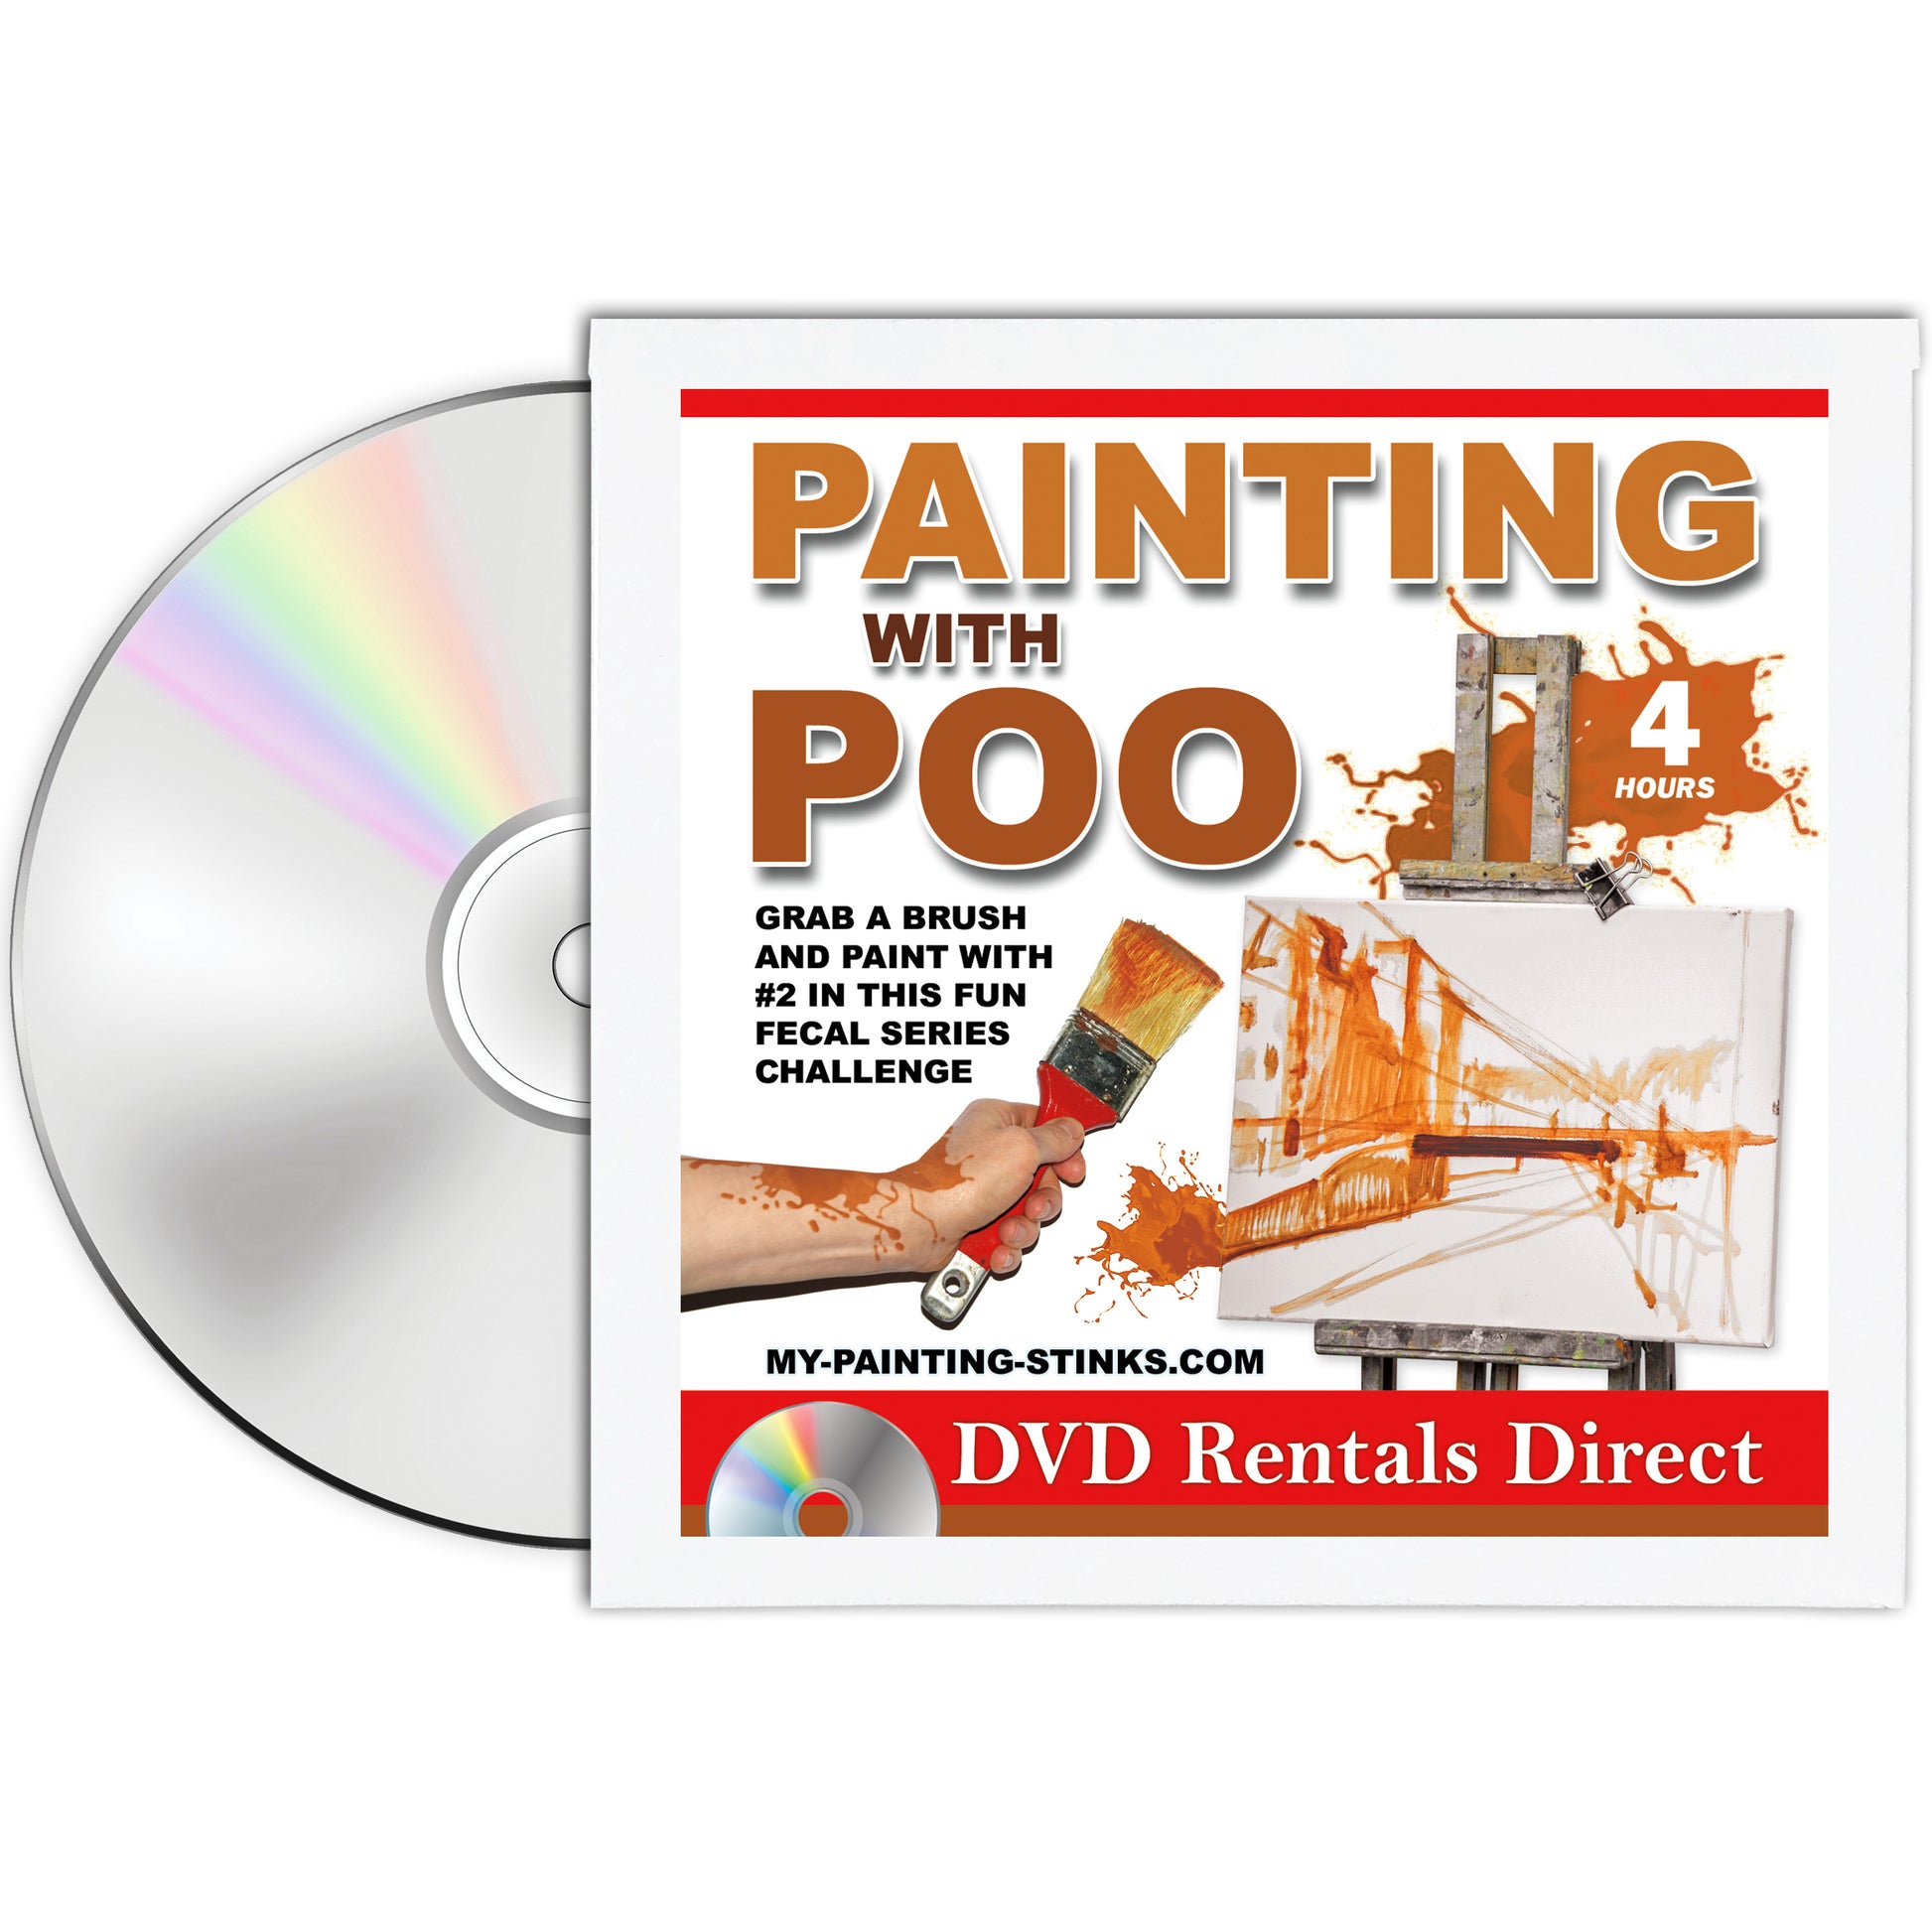 Painting with Poo Fake DVD mail prank